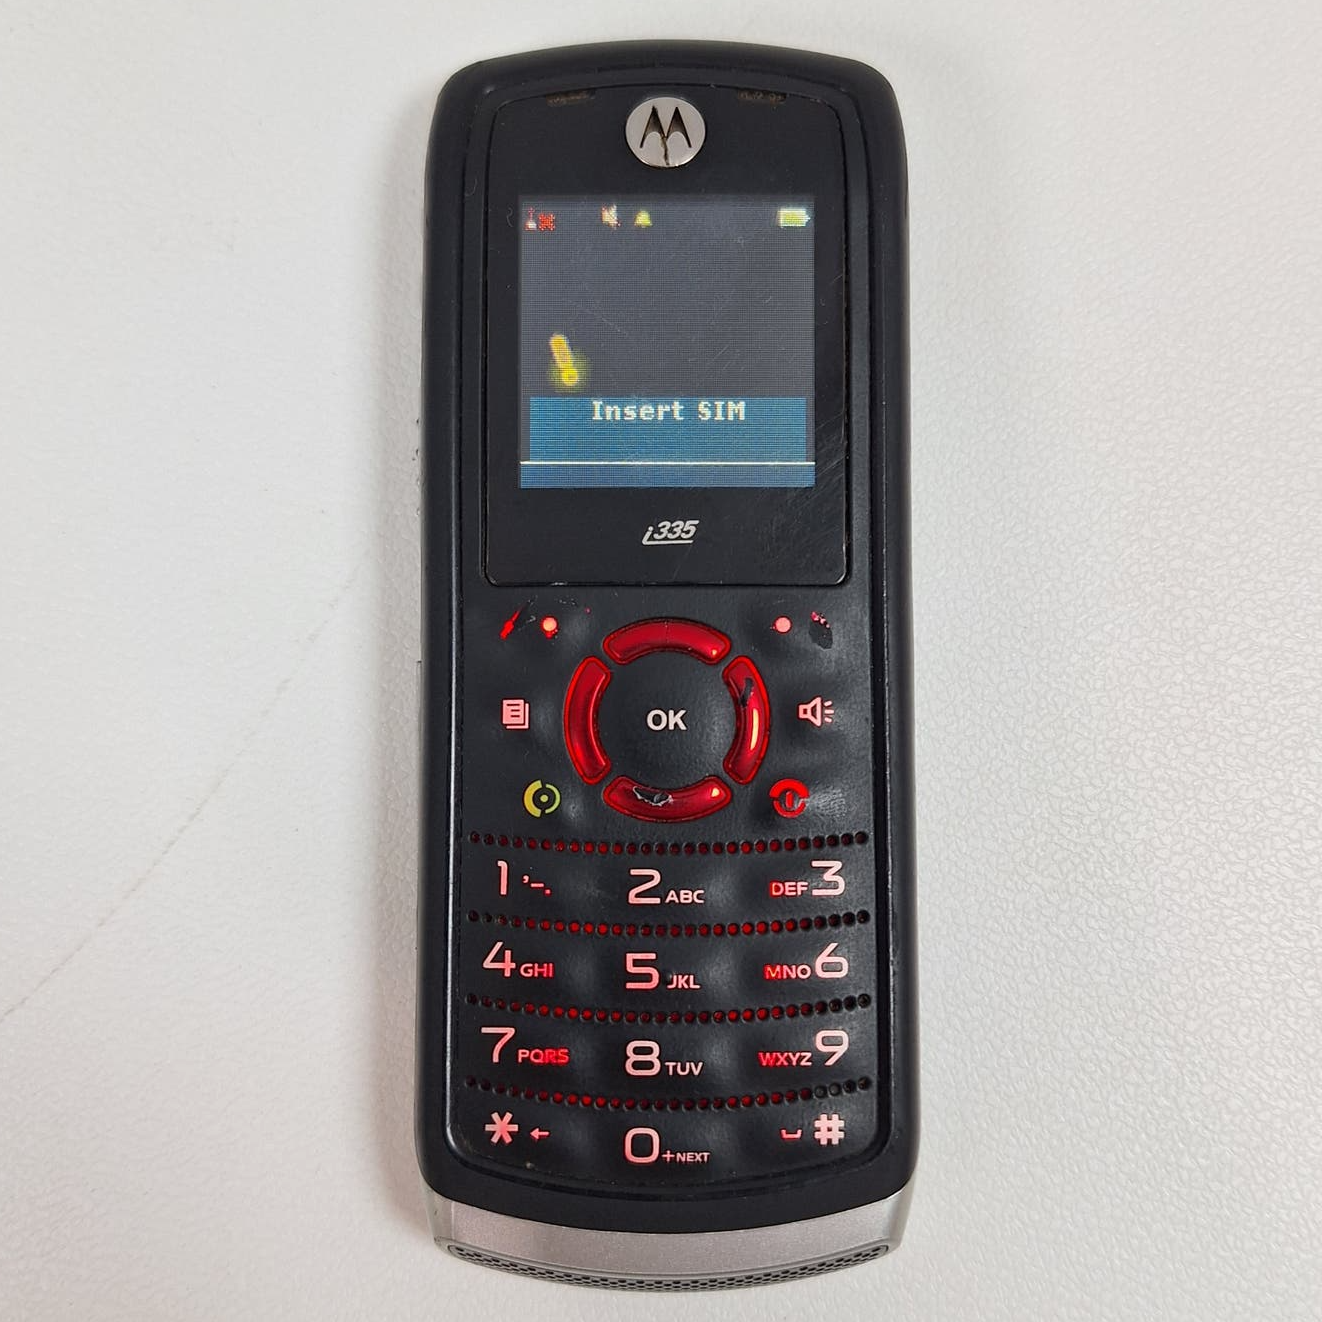 Primary image for Motorola i series i335 Black/Silver Phone (Boost Mobile)